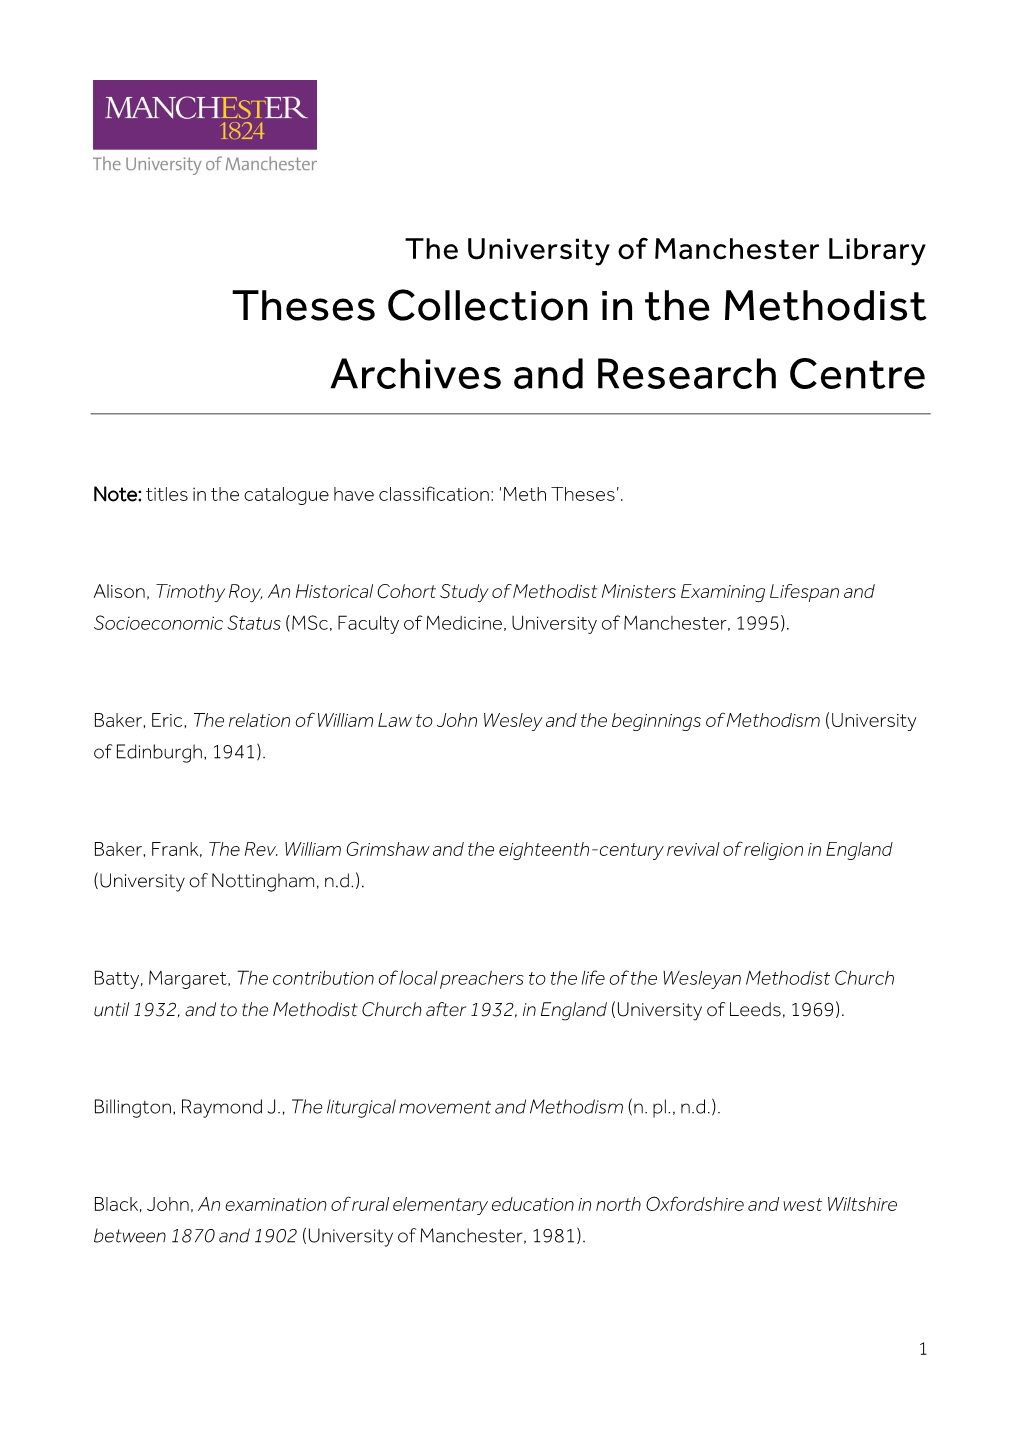 Theses Collection in the Methodist Archives and Research Centre